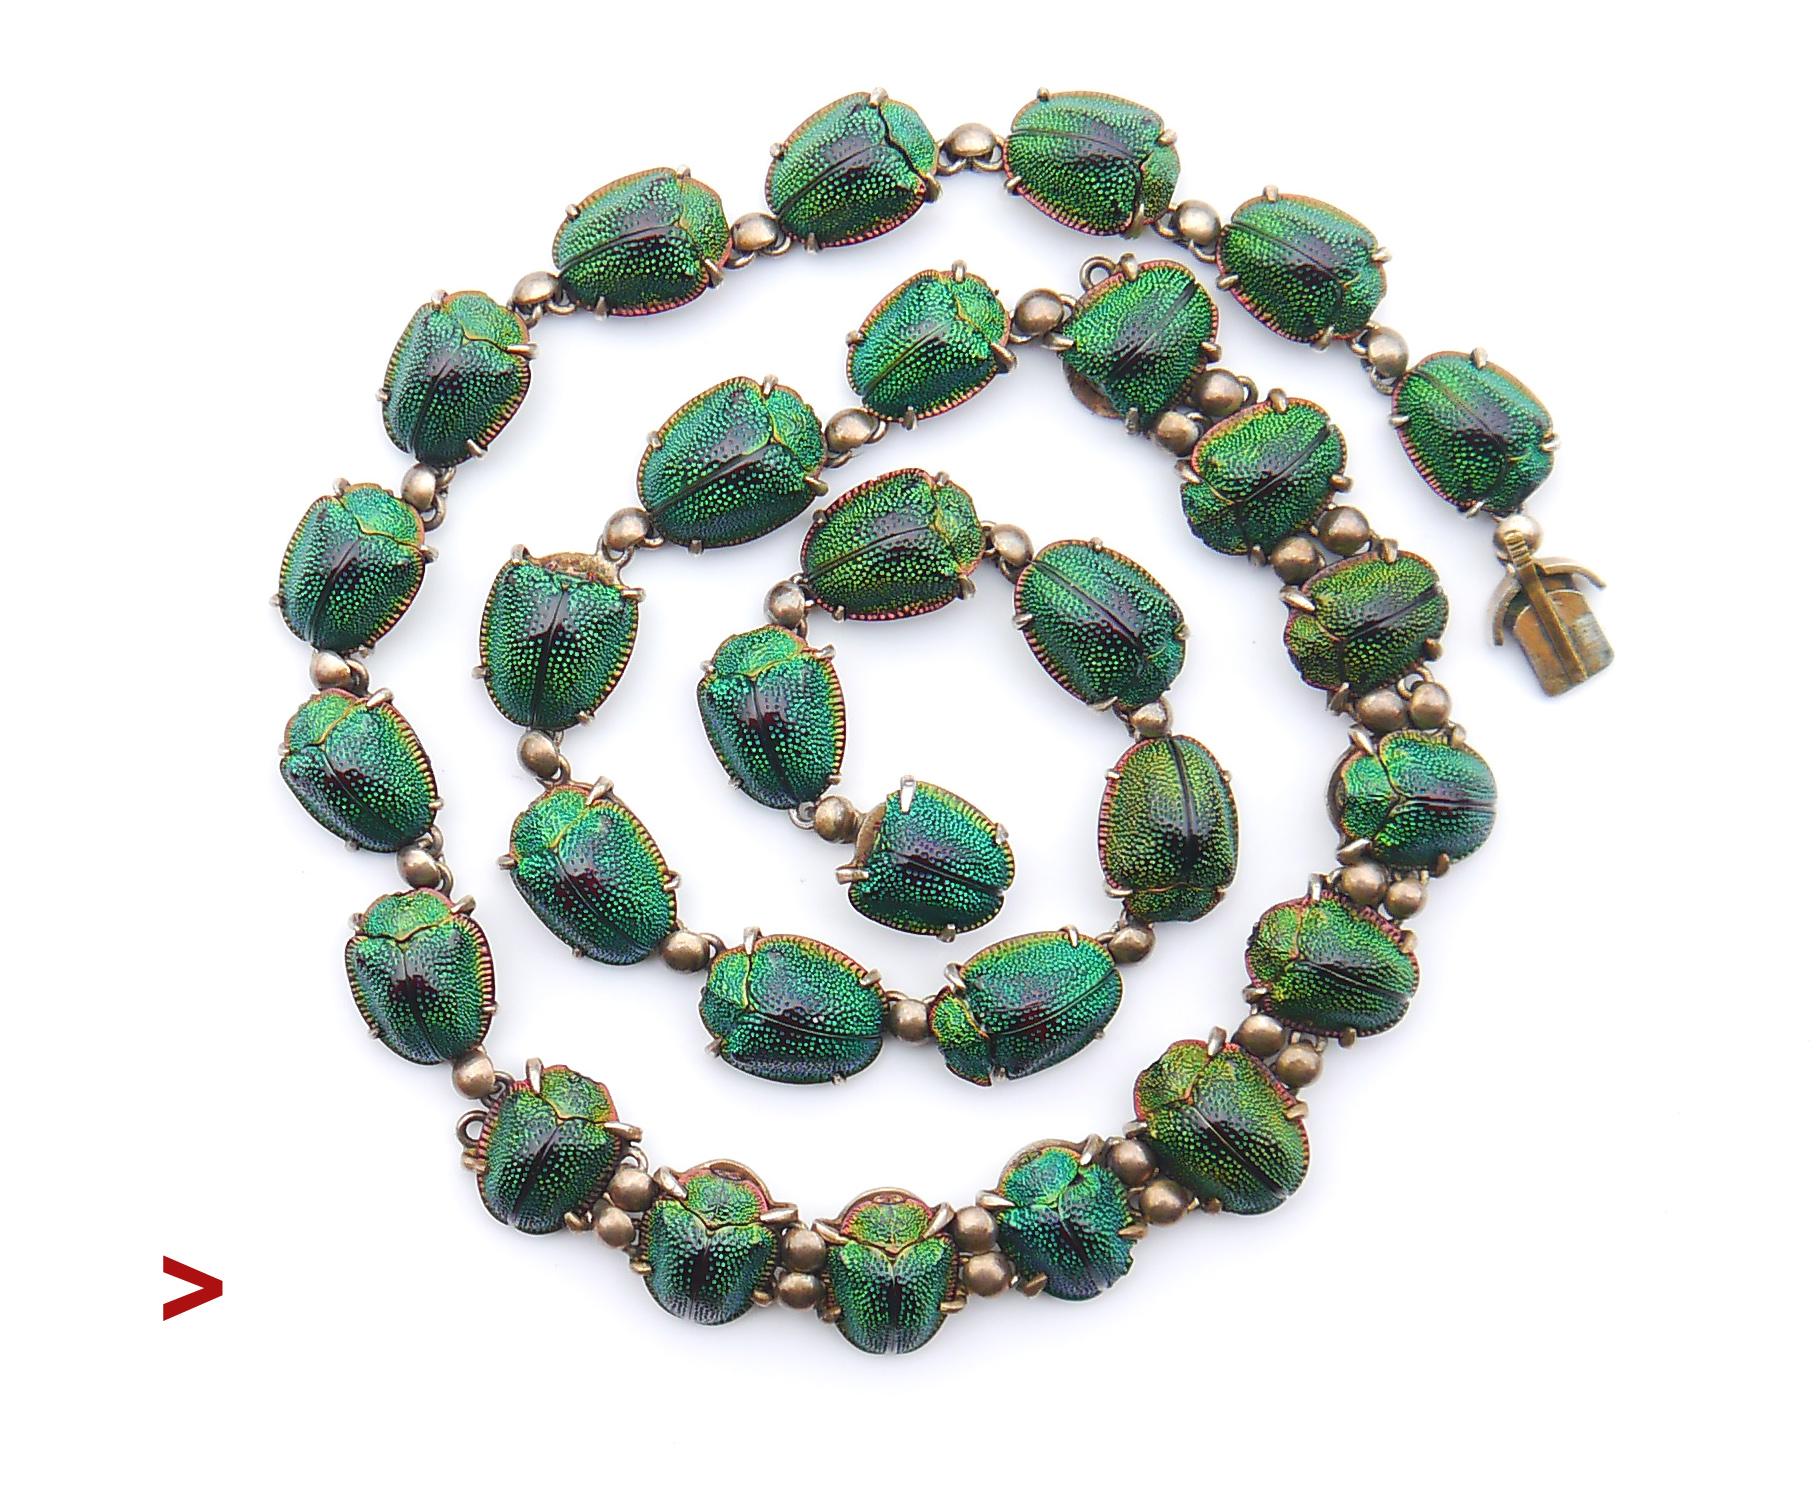 
Rare and very unusual piece of Egyptian - revival styled necklace with 30 genuine emerald Green Scarab Beetles set into gilt Silver frames.

These shimmering Tortoise beetles once were the Victorian times' species of choice to stand in for genuine